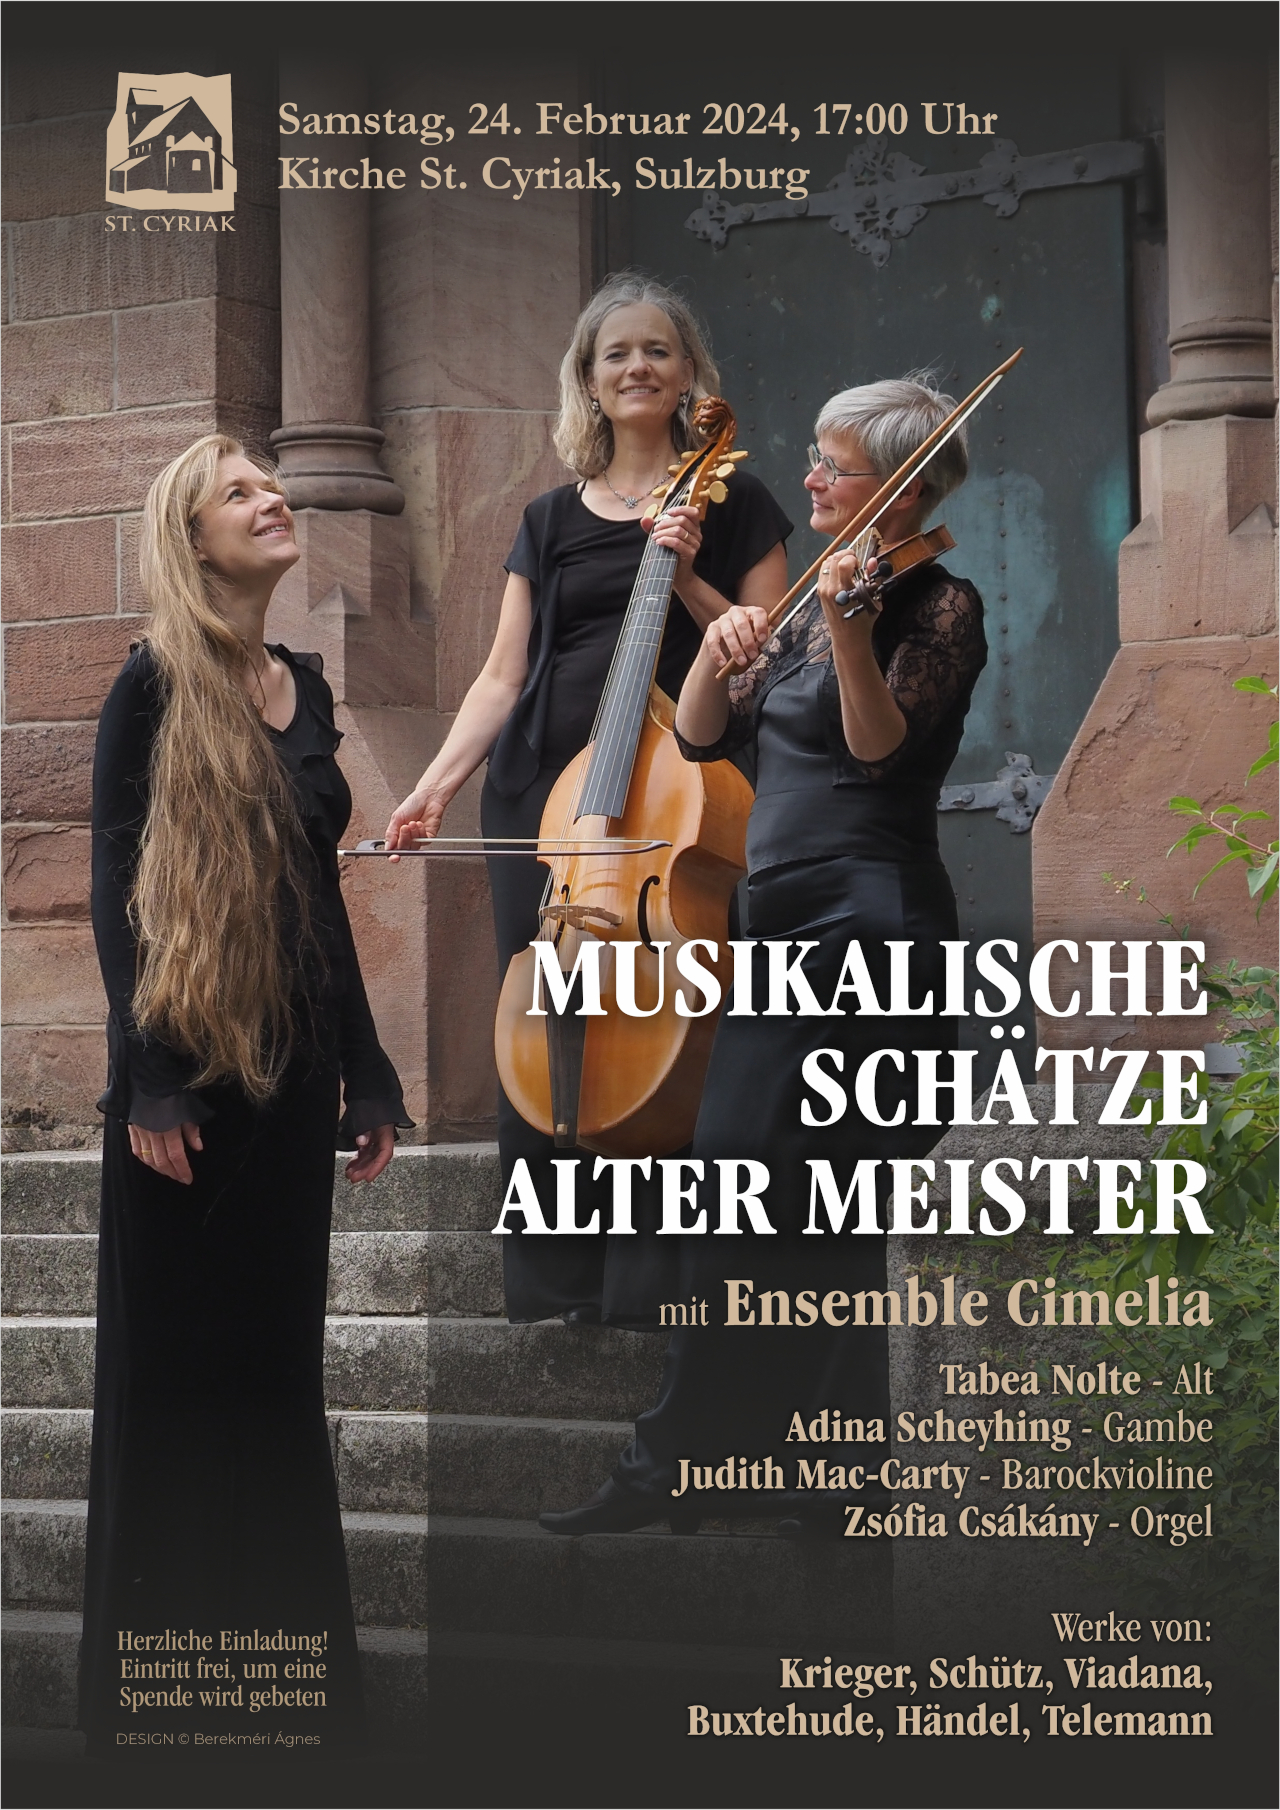 You are currently viewing Musikalische Schätze alter Meister II.